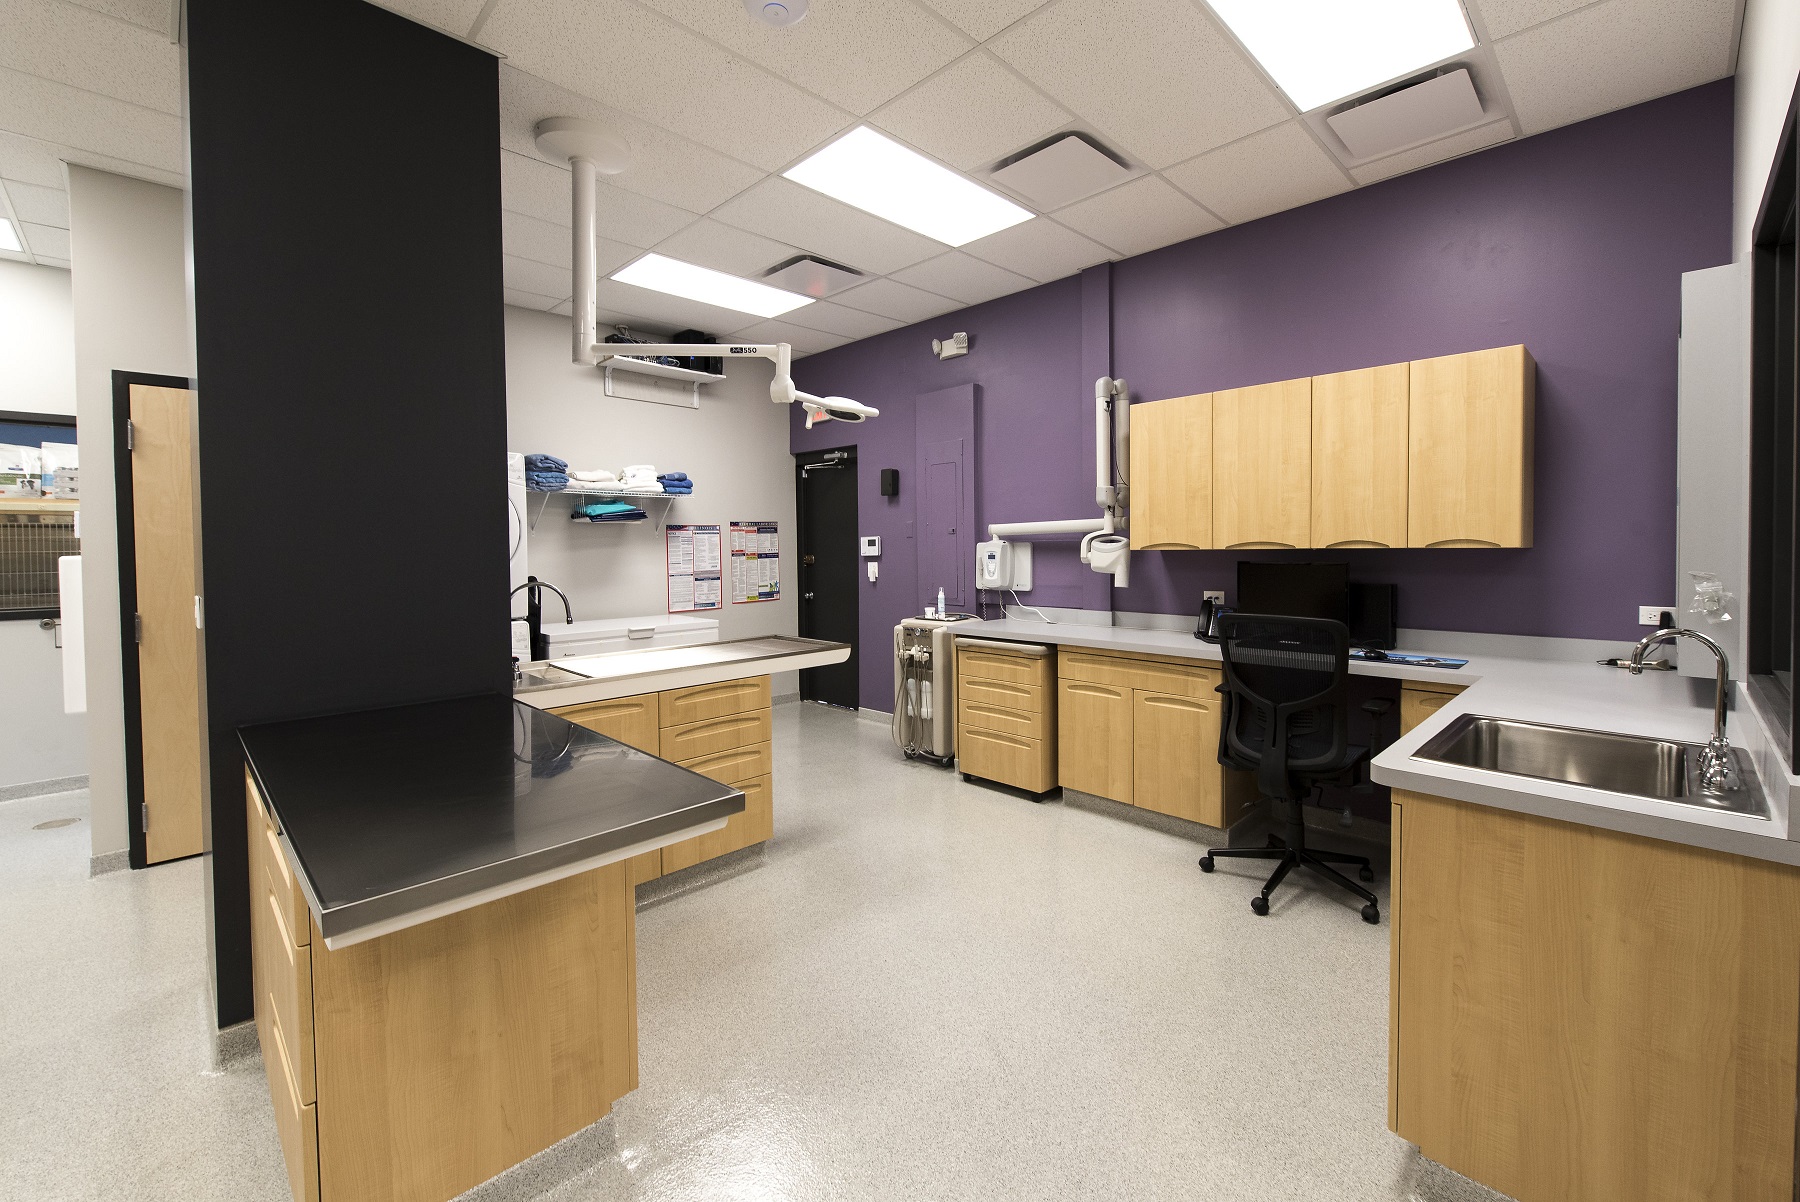 Tour Our Hospital | Welcome to Evanston Animal Hospital